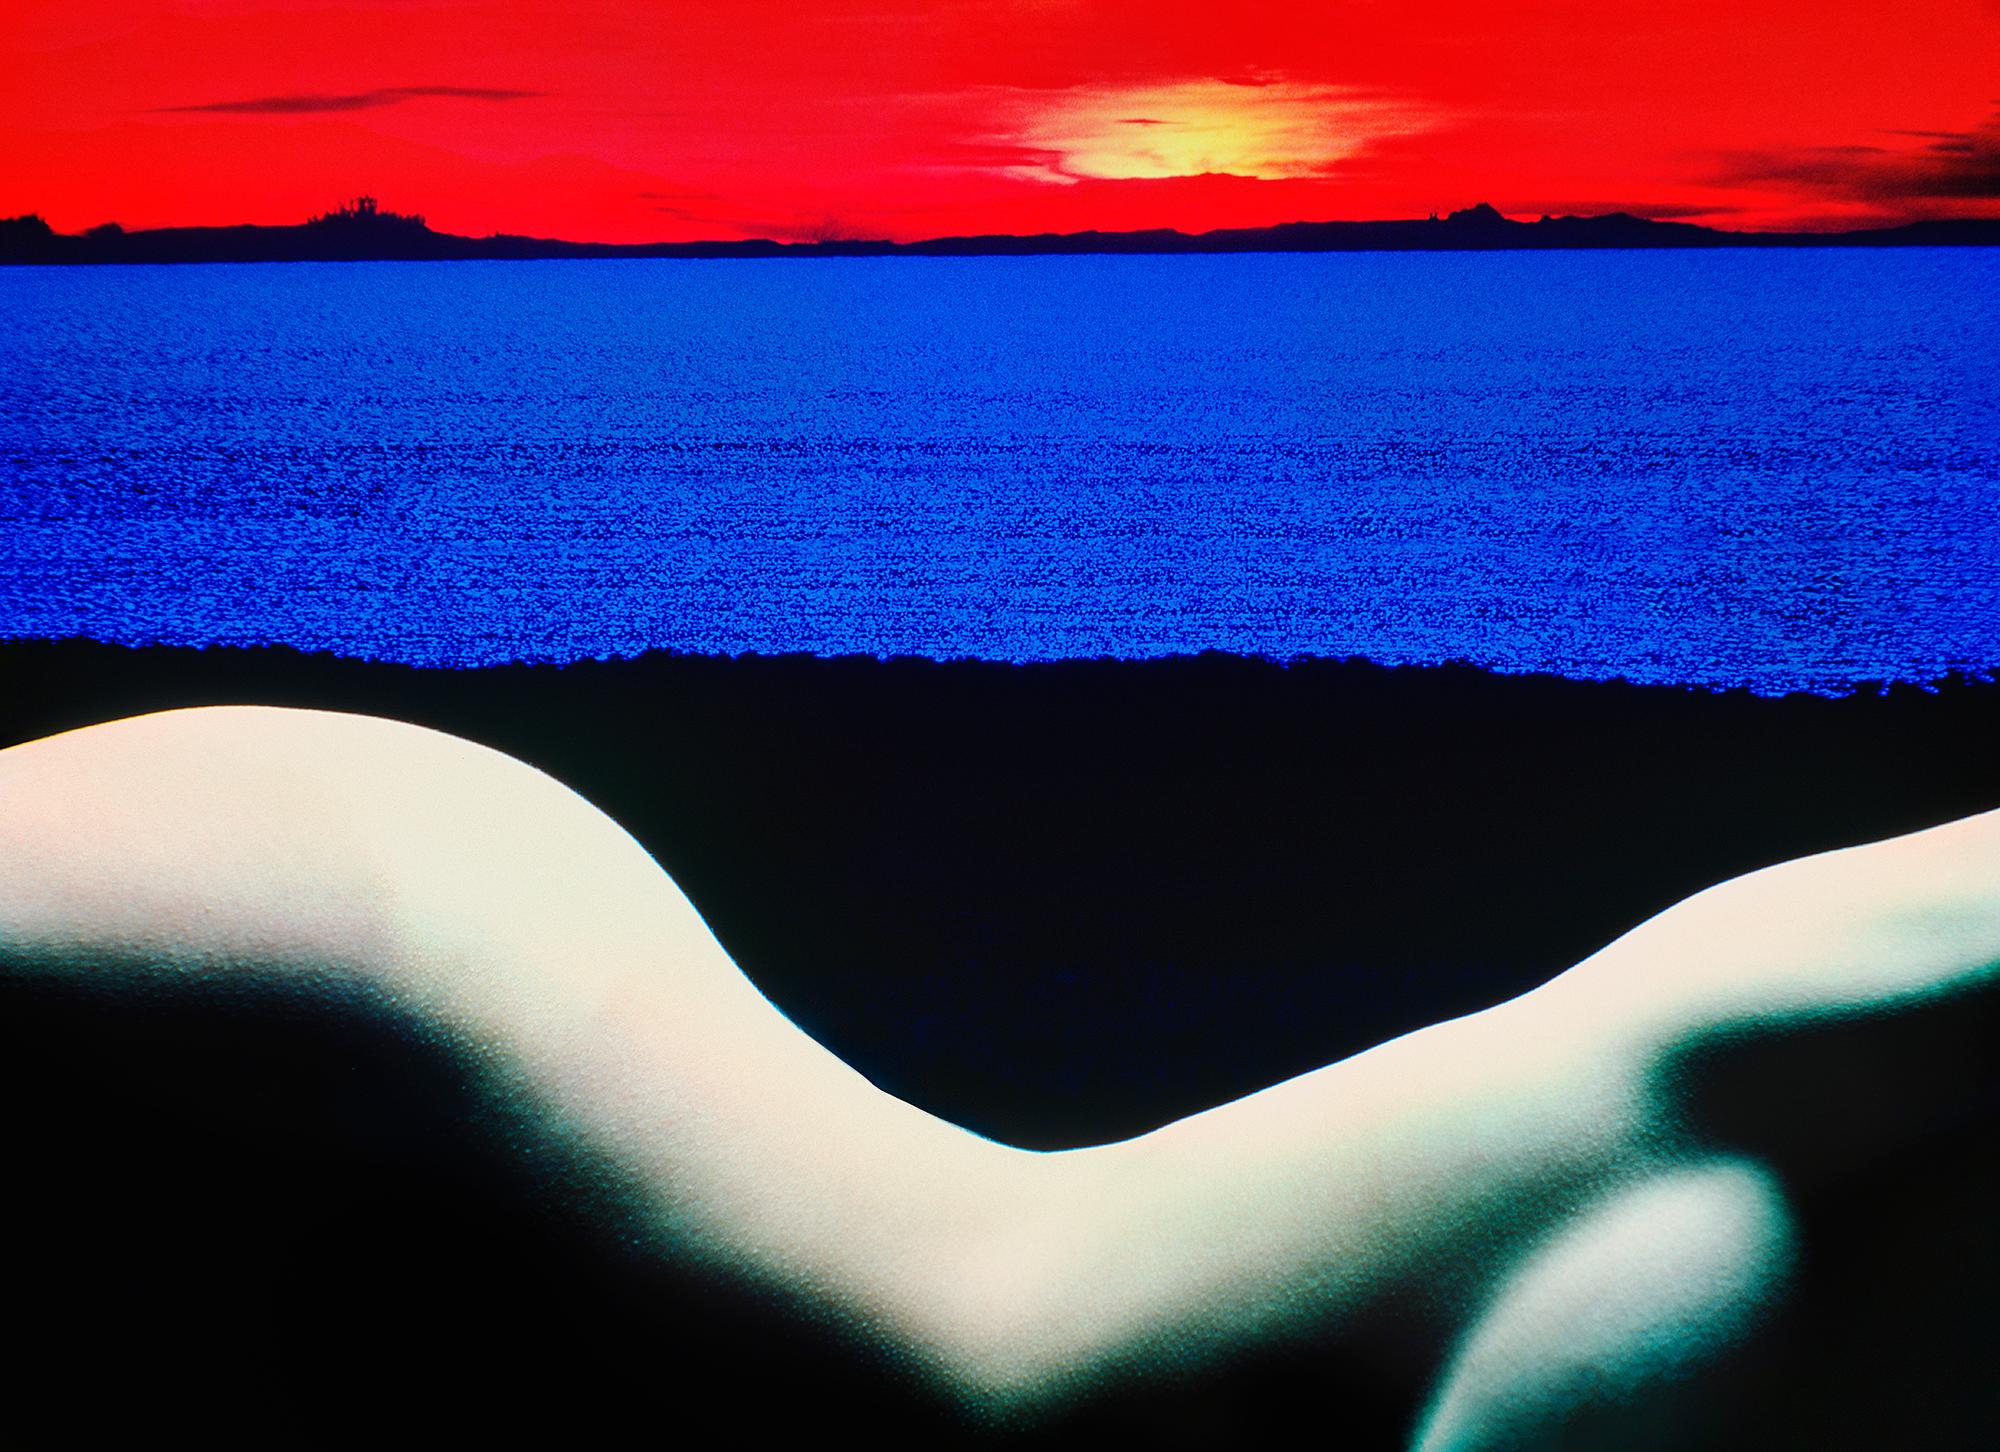 Mitchell Funk Nude Photograph - Curvy Nude in Surreal Landscape of Red and Blue - Album Cover